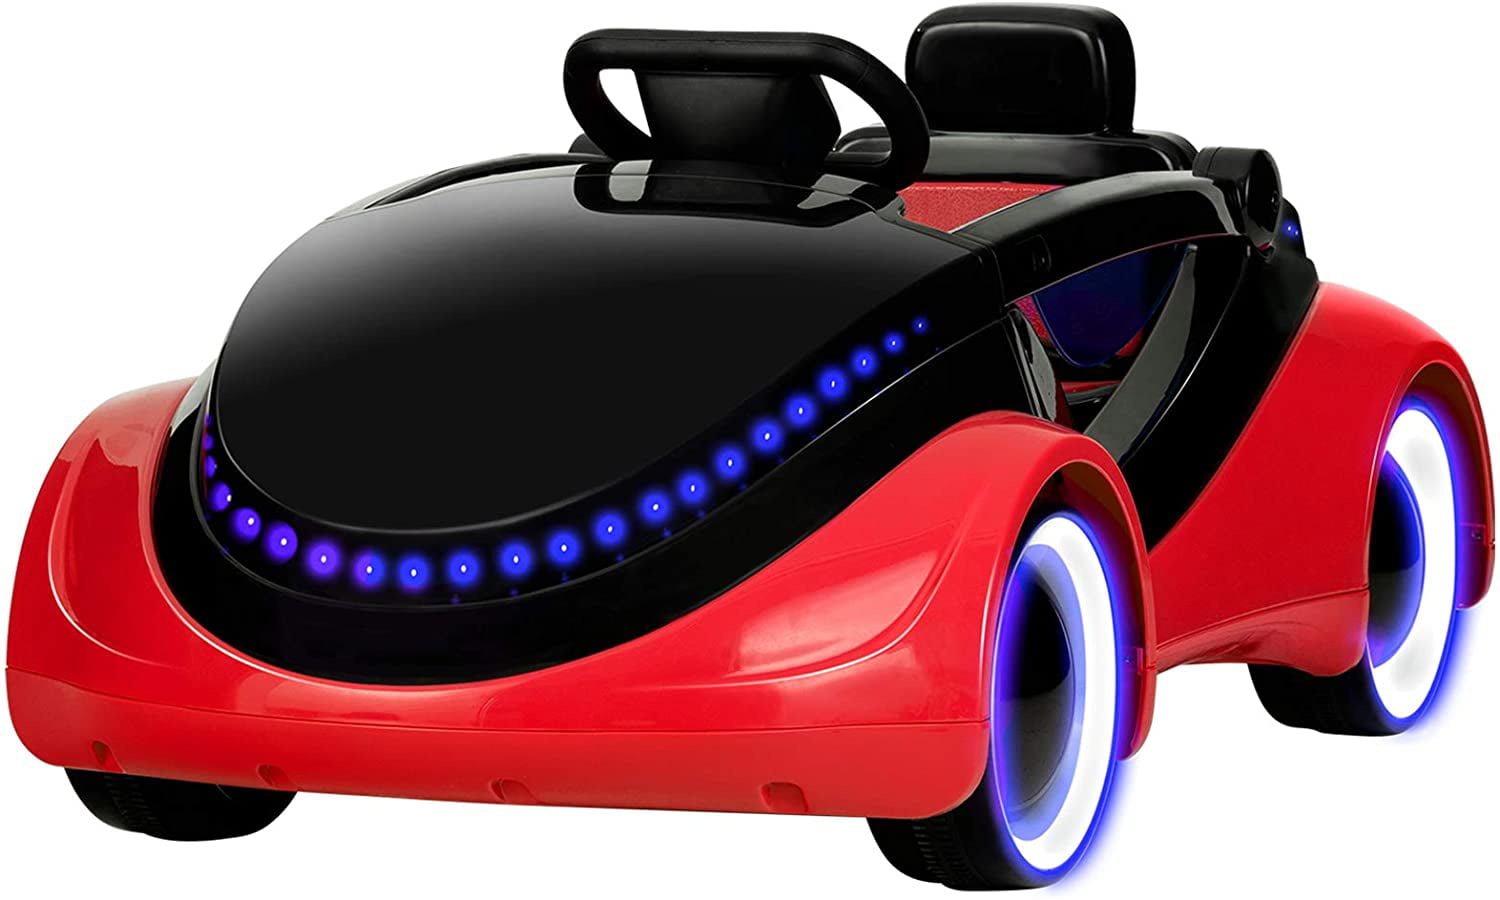 Details about   Kidzone Diy Race #00-99 6V Kids Toy Electric Ride On Bumper Car Vehicle Remote C 